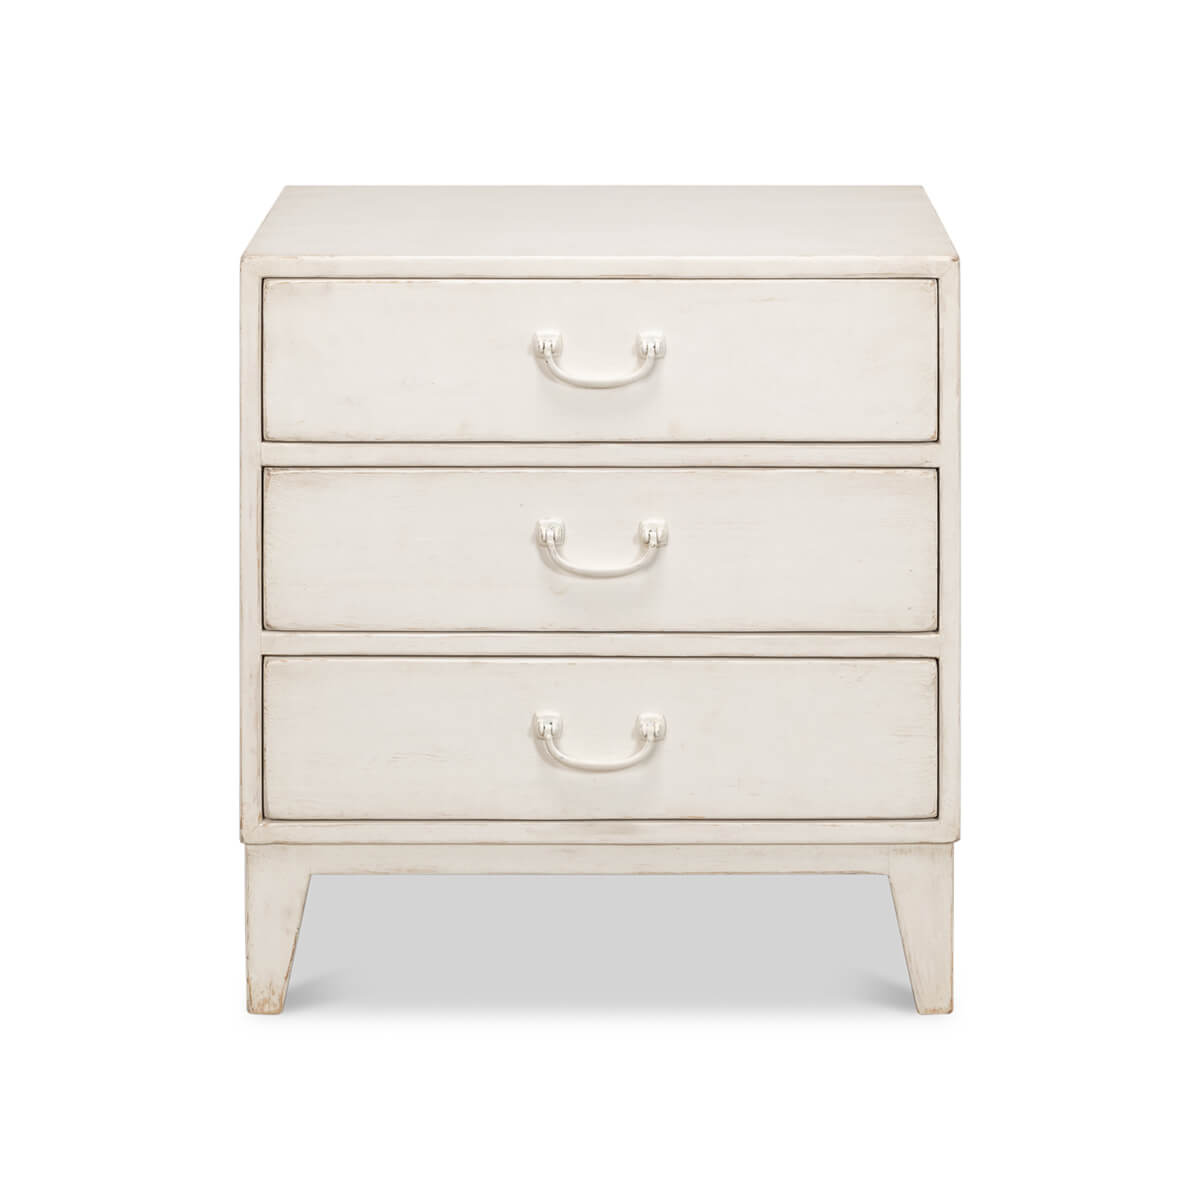 Antique White Chest of Drawers - English Georgian America